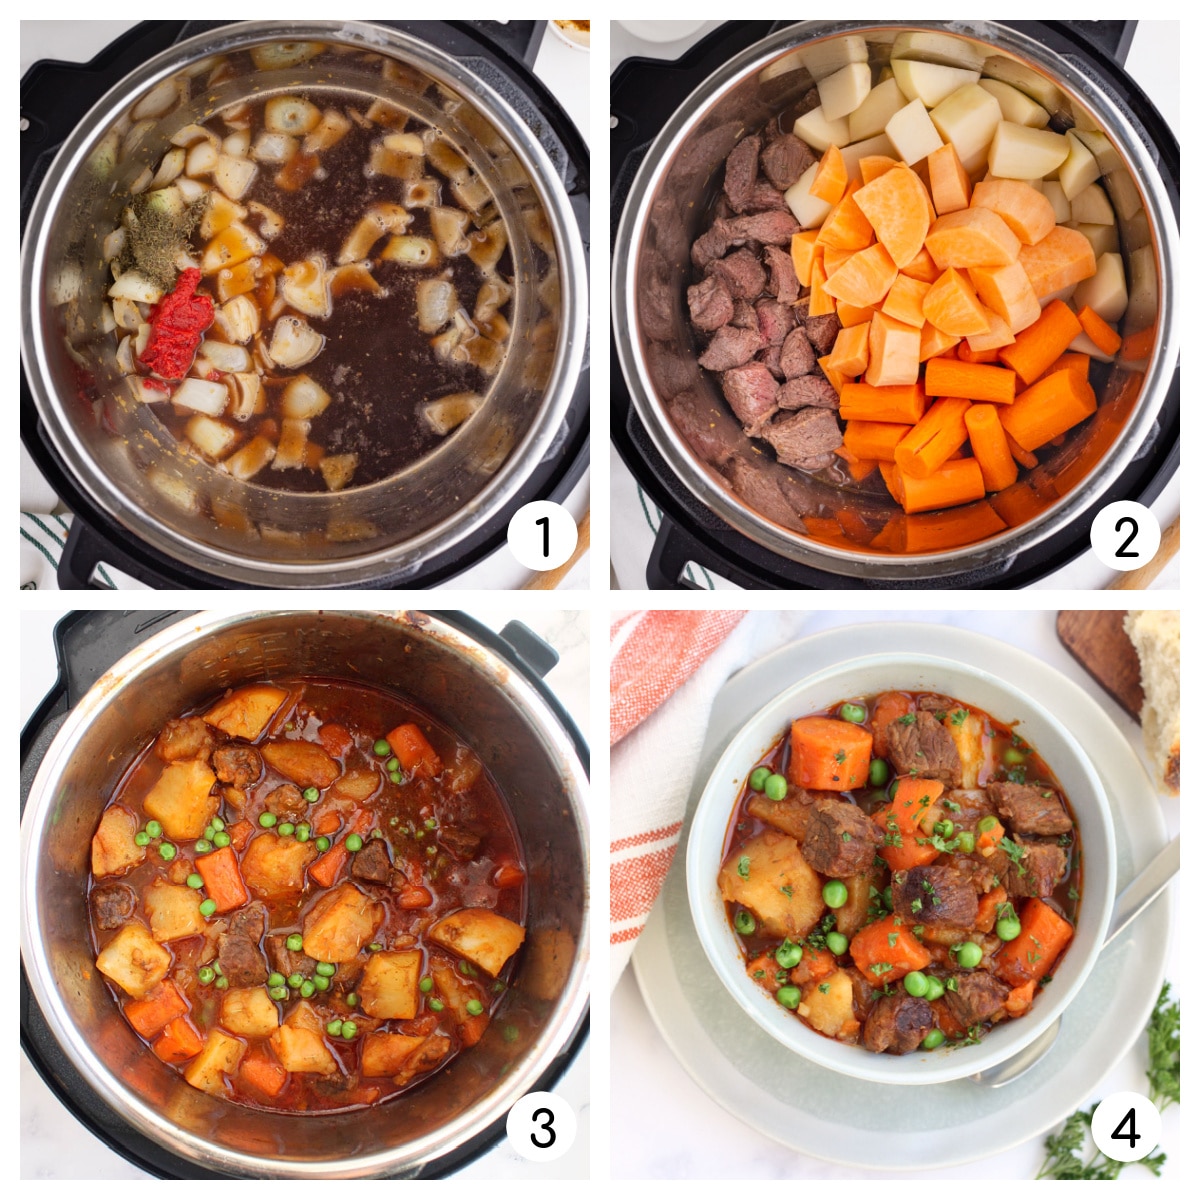 process shots for making beef stew in the instant pot: deglazing the pot, adding vegetables and finished product and adding green peas